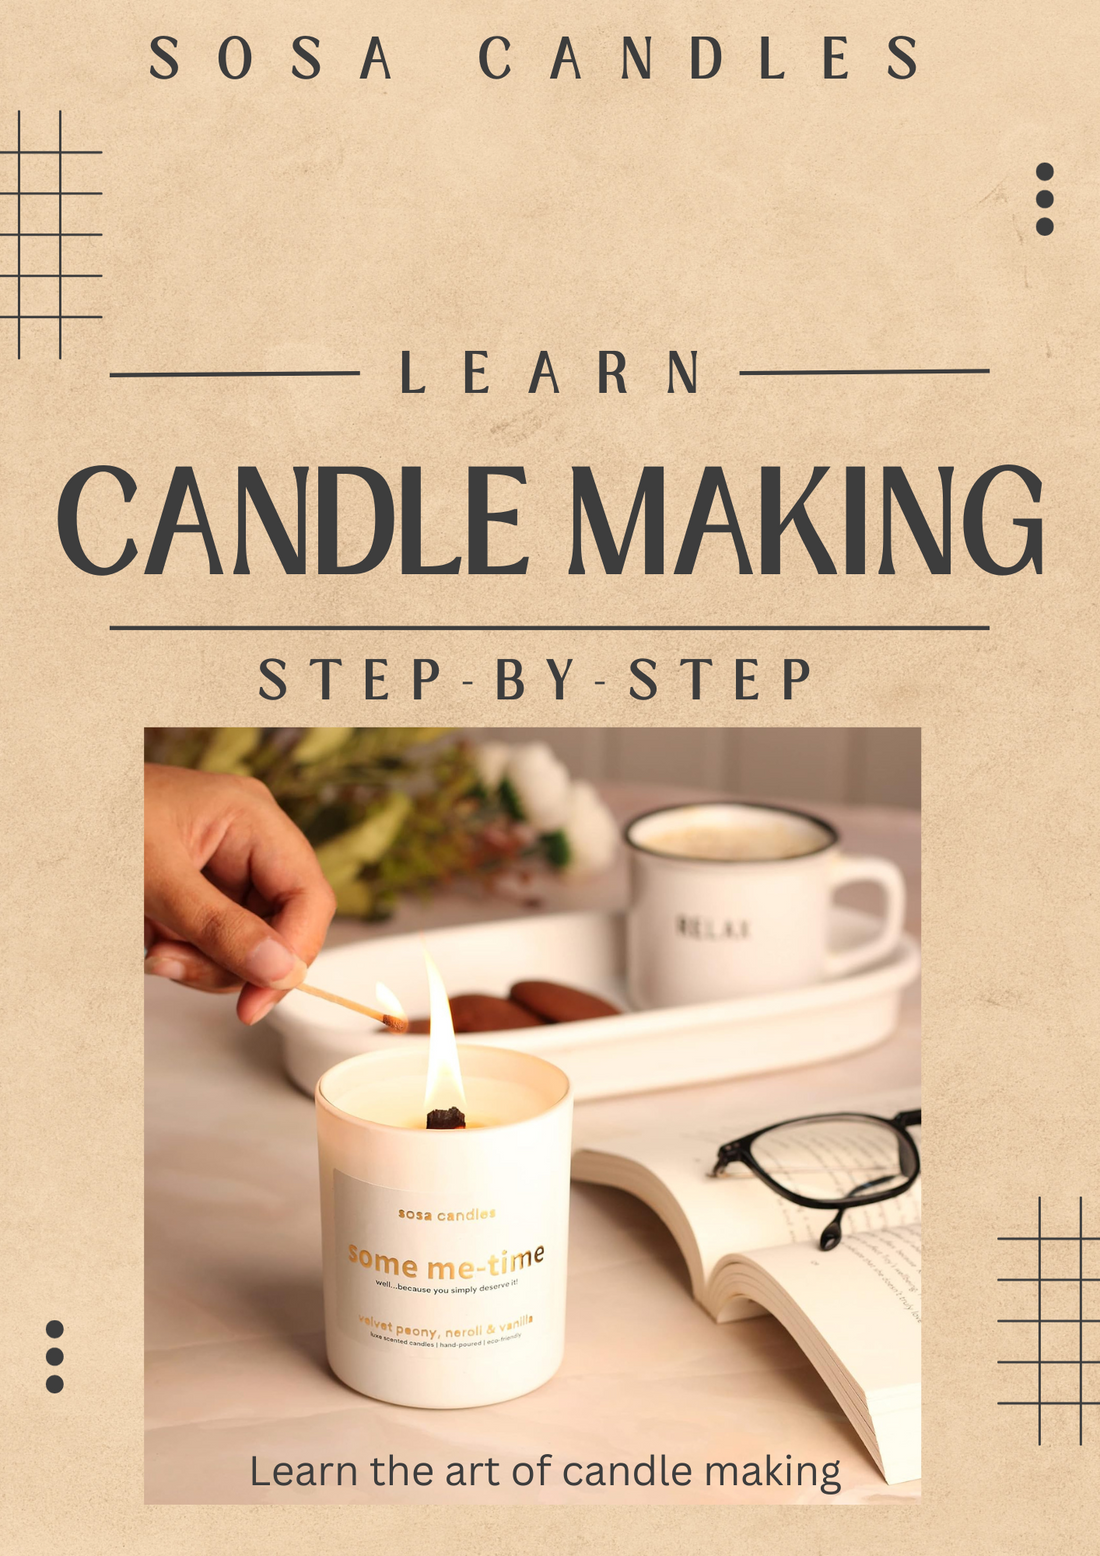 Your Guide to Candle Making with SOSA's New eBook